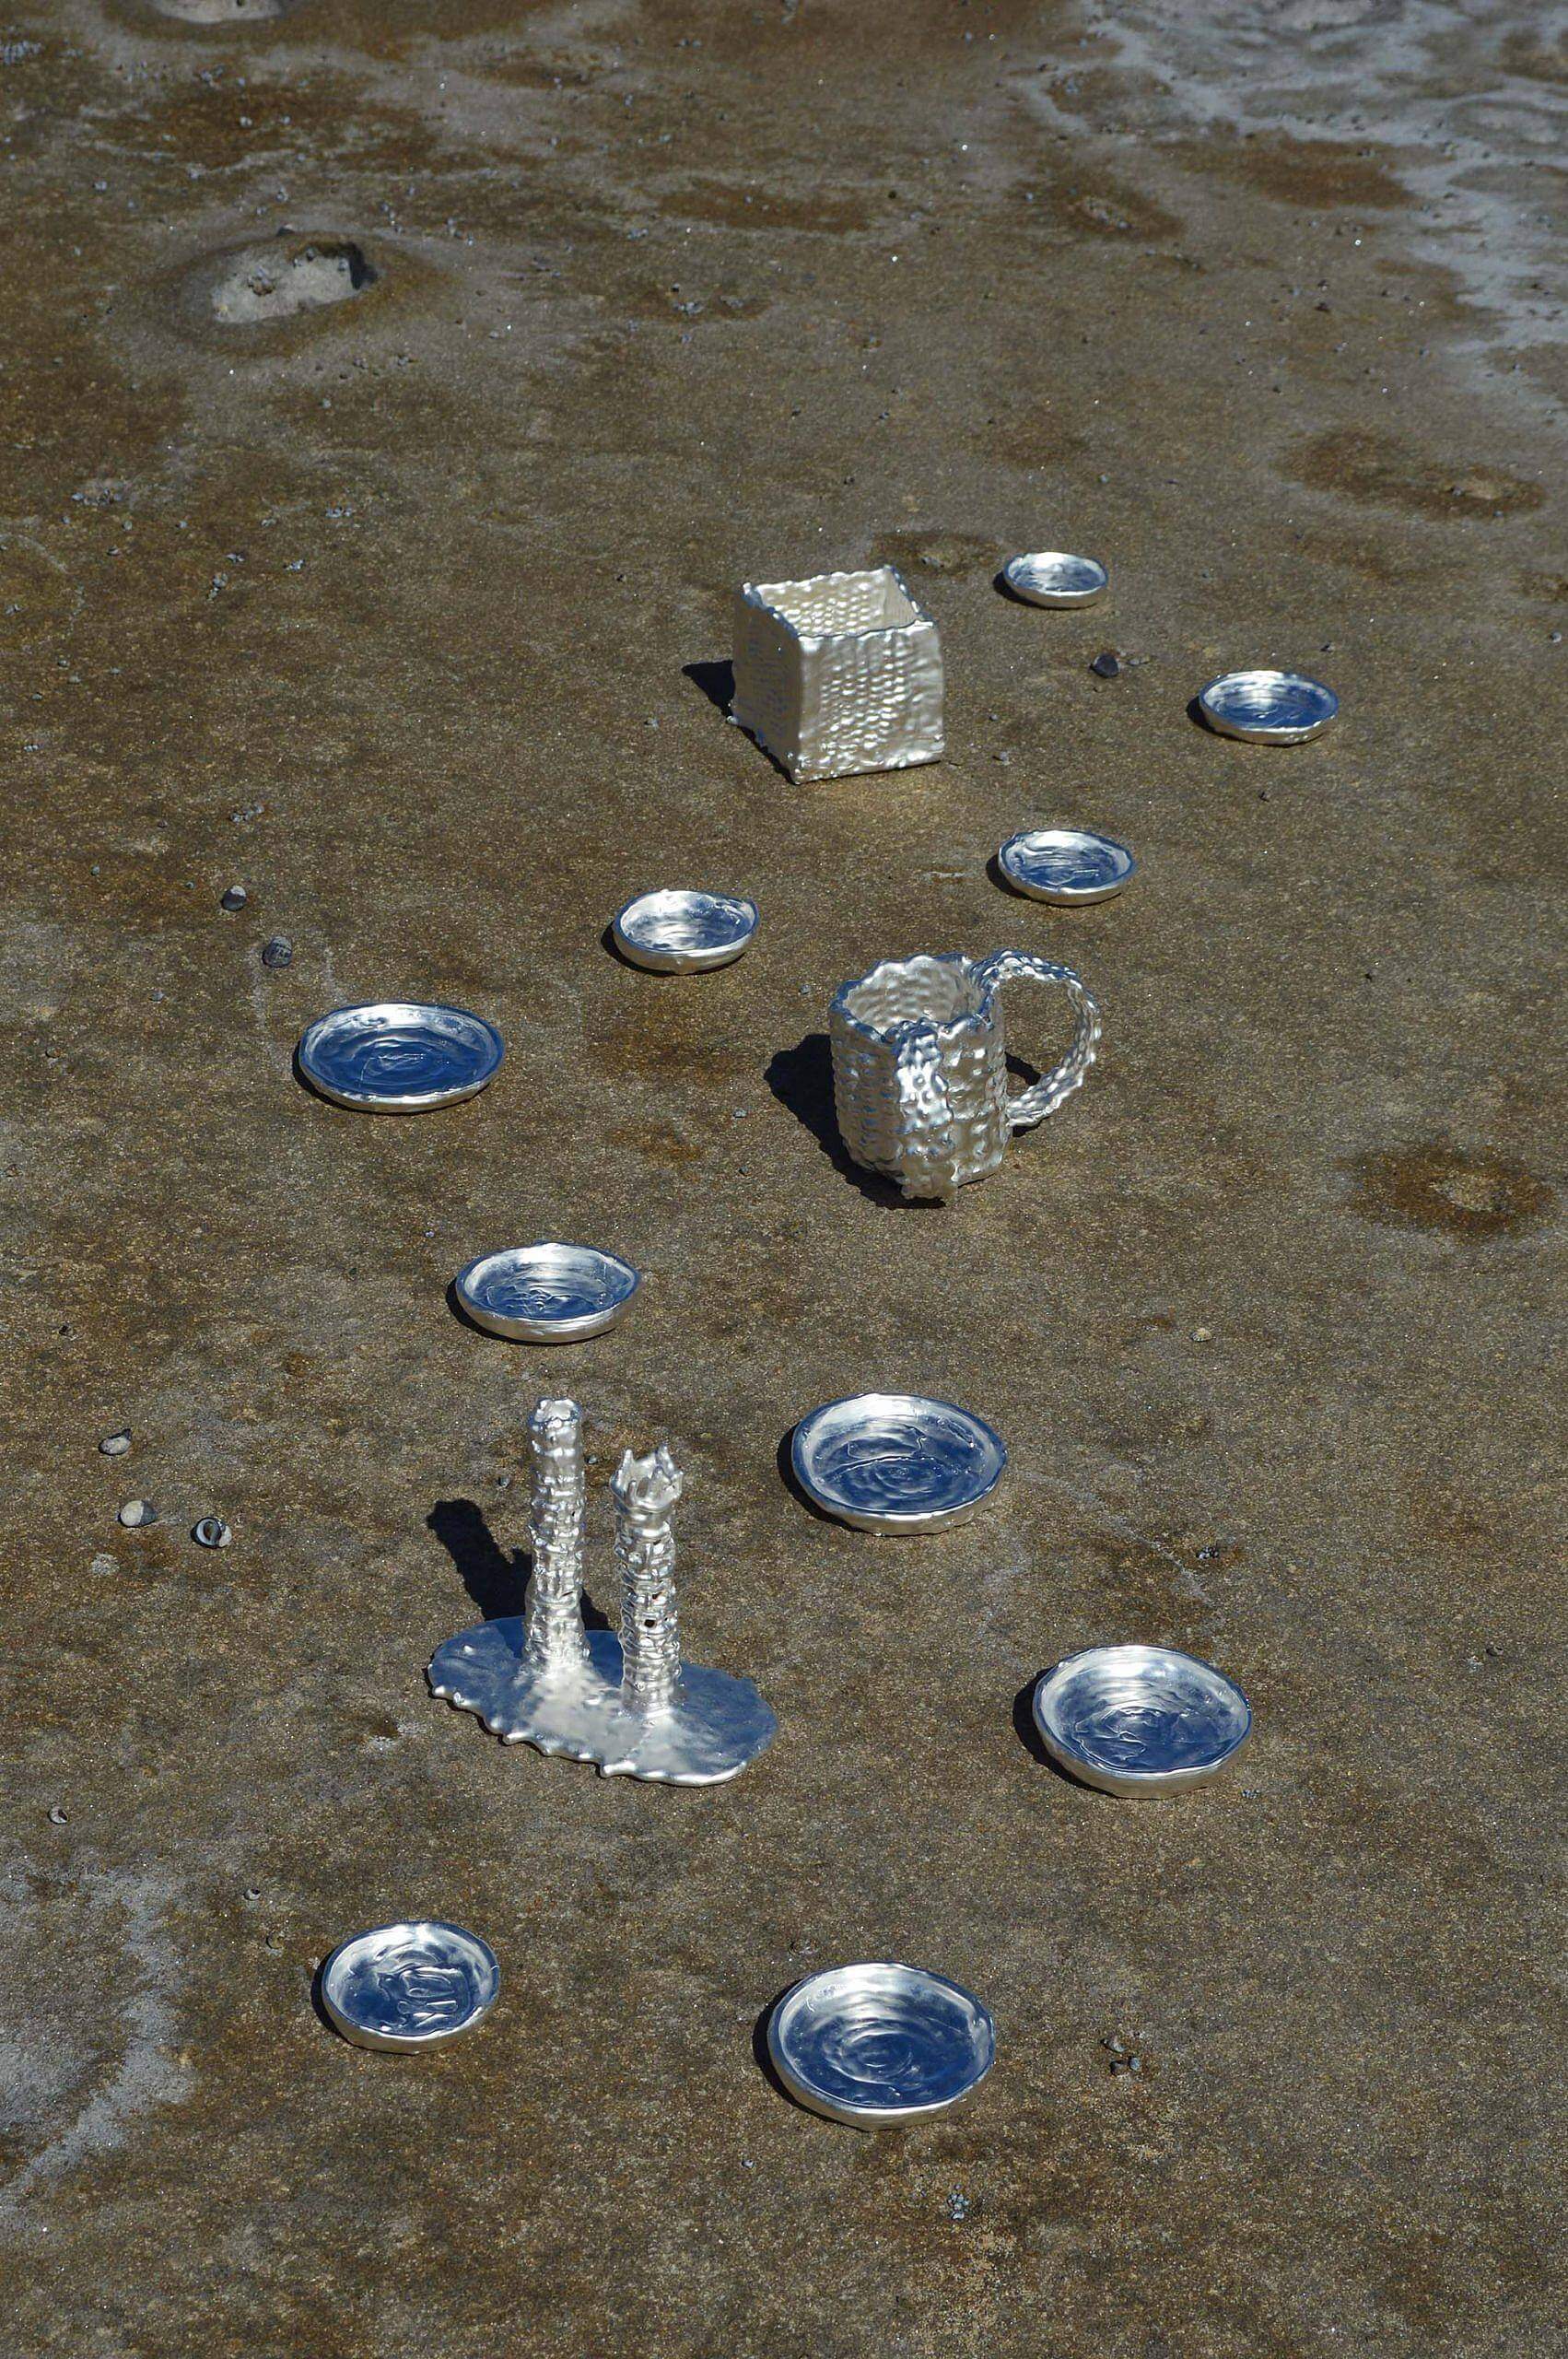 silver Judaica objects sitting on sand